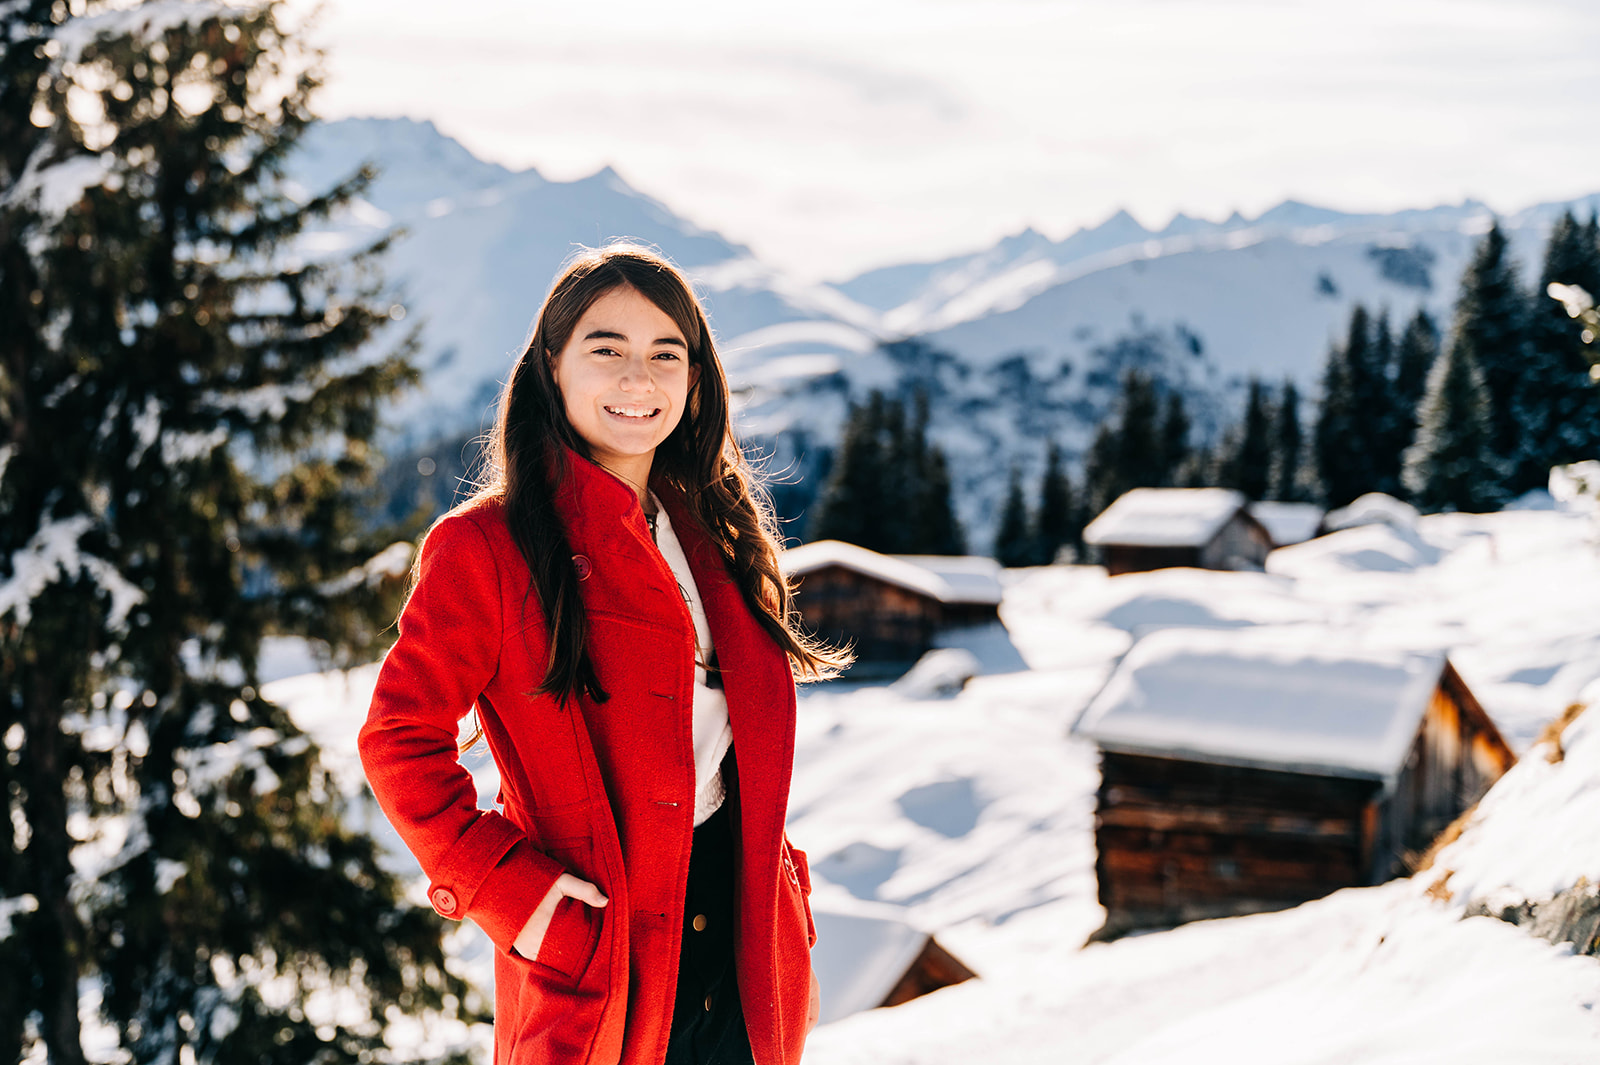 Snowy Swiss Alps Winter Portraits Family Girl in Red Coat